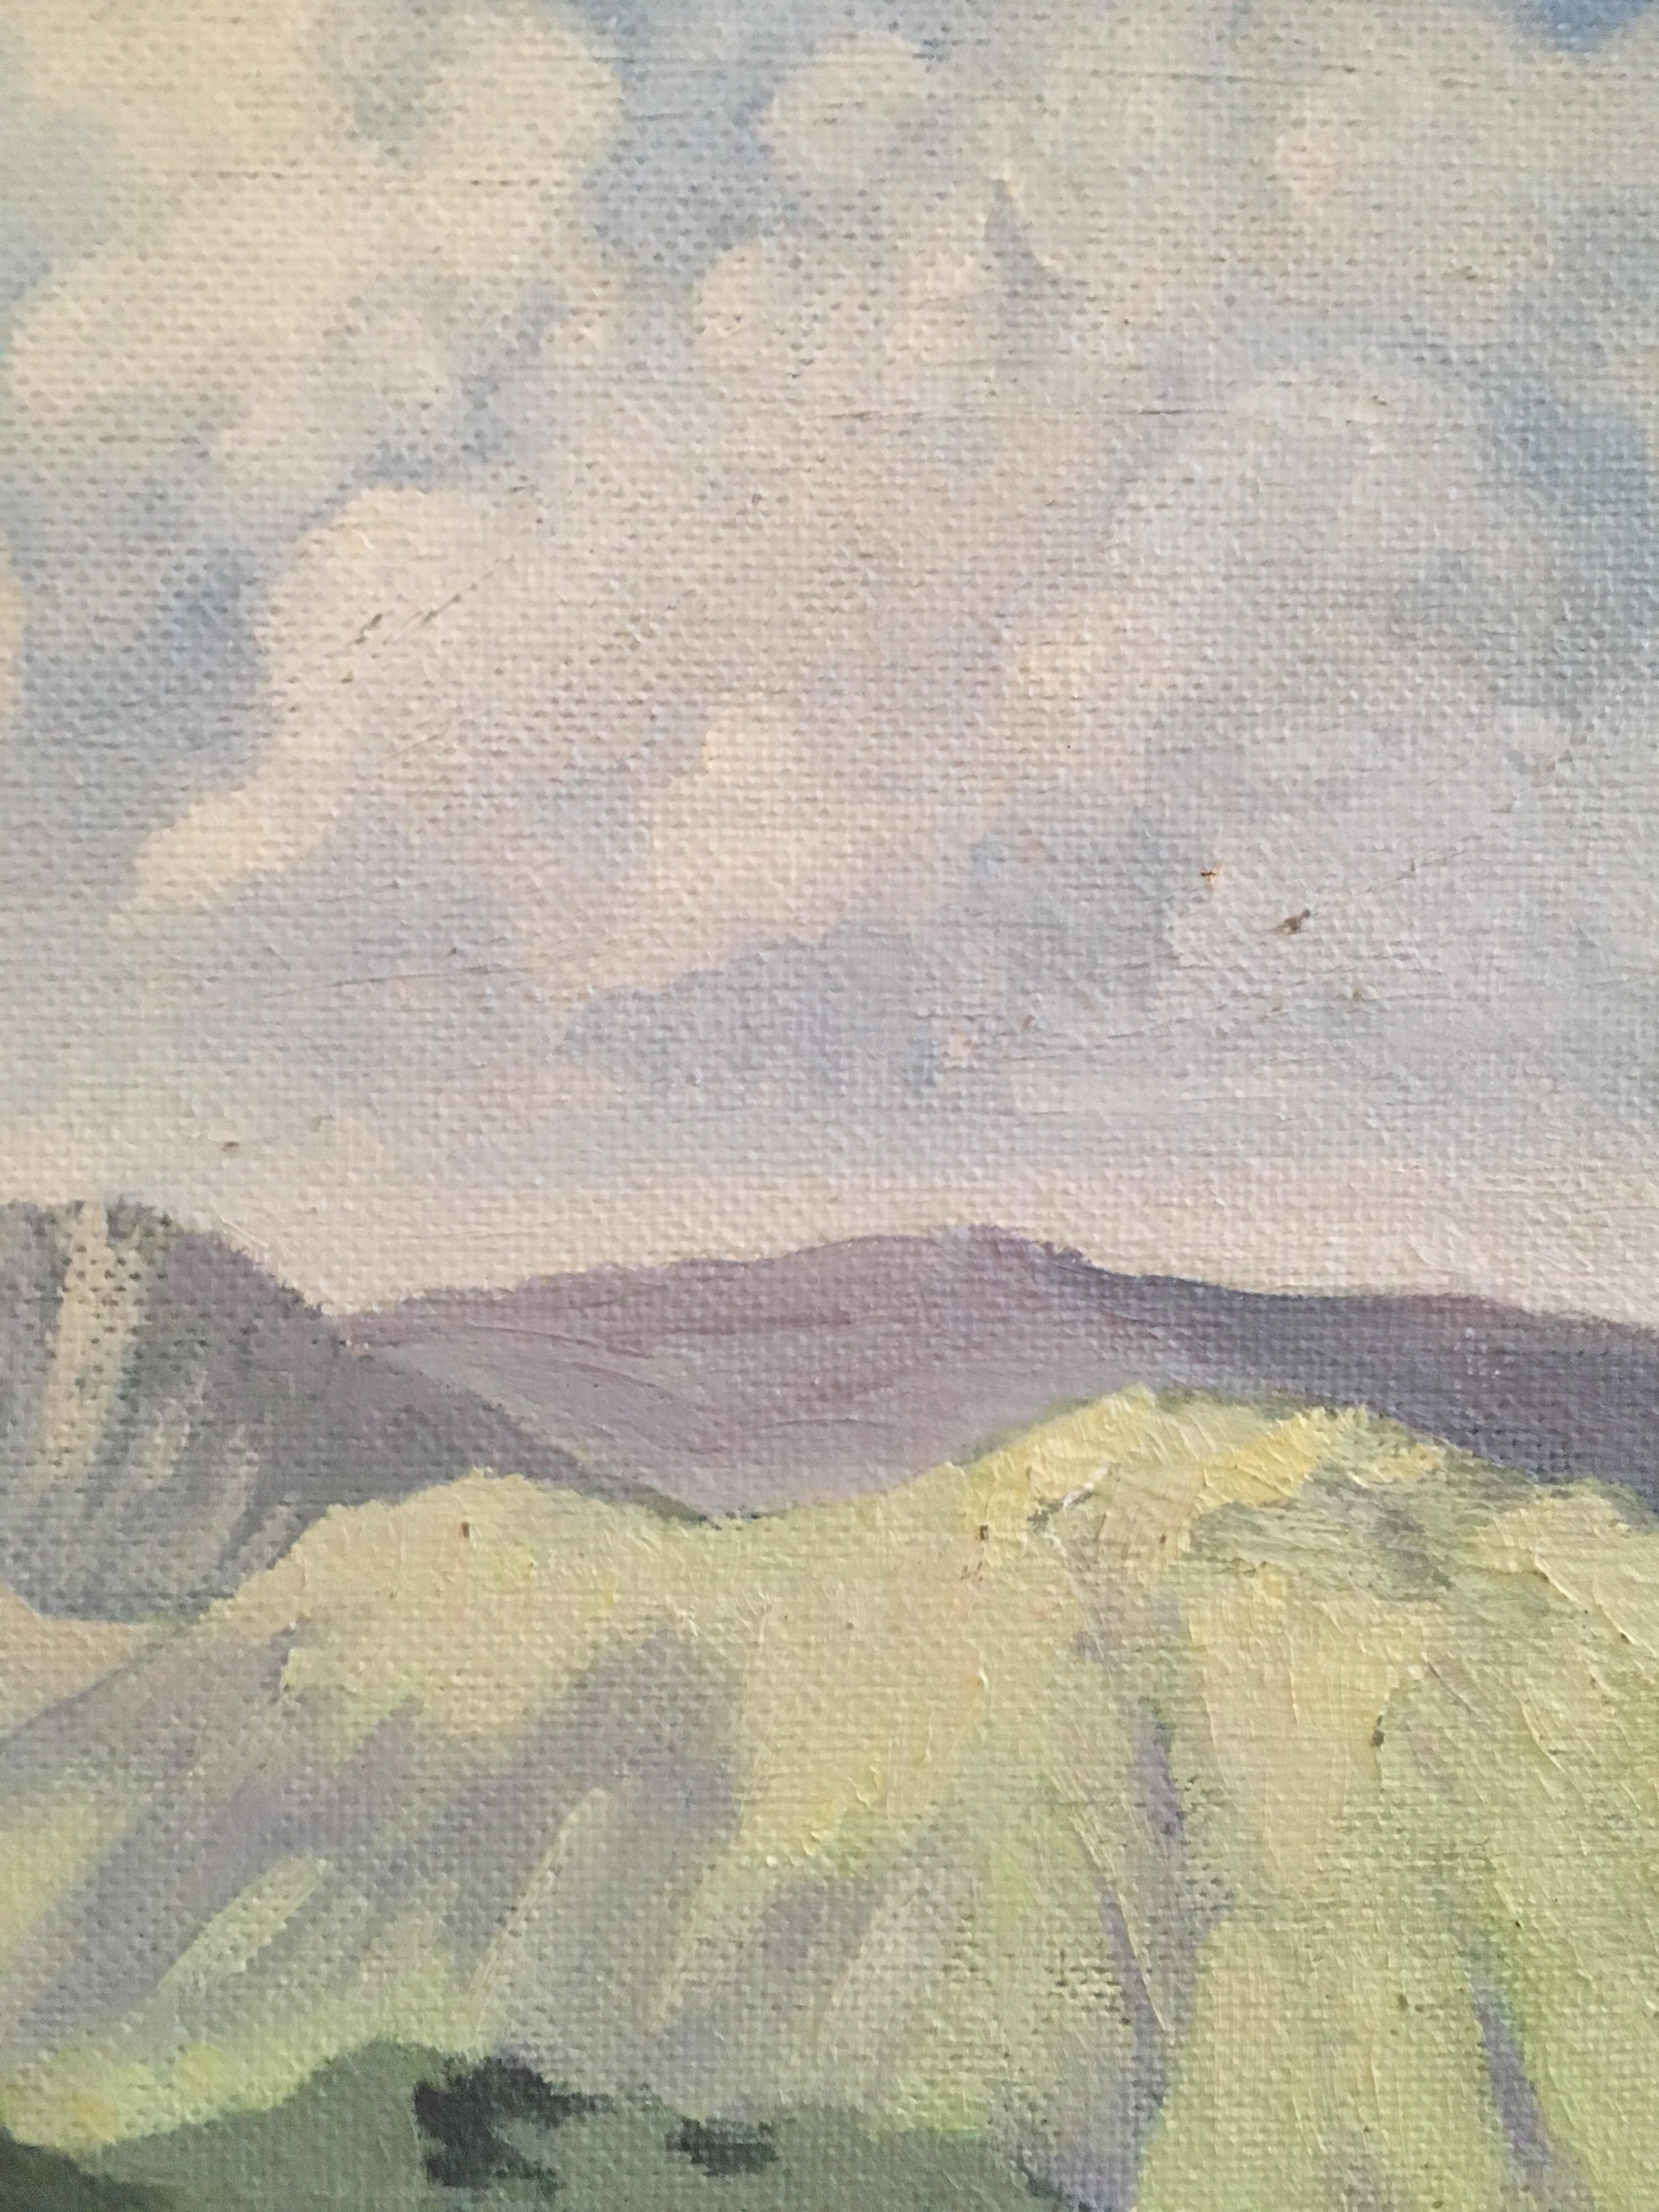 Welsh Mountains, Impressionist Landscape, Original Oil Painting, Signed
By Welsh artist Wilfred Colclough, Mid 20th Century
Signed and dated '59 by the artist on the lower left hand corner
Oil painting on board, unframed
Board size: 16 x 20